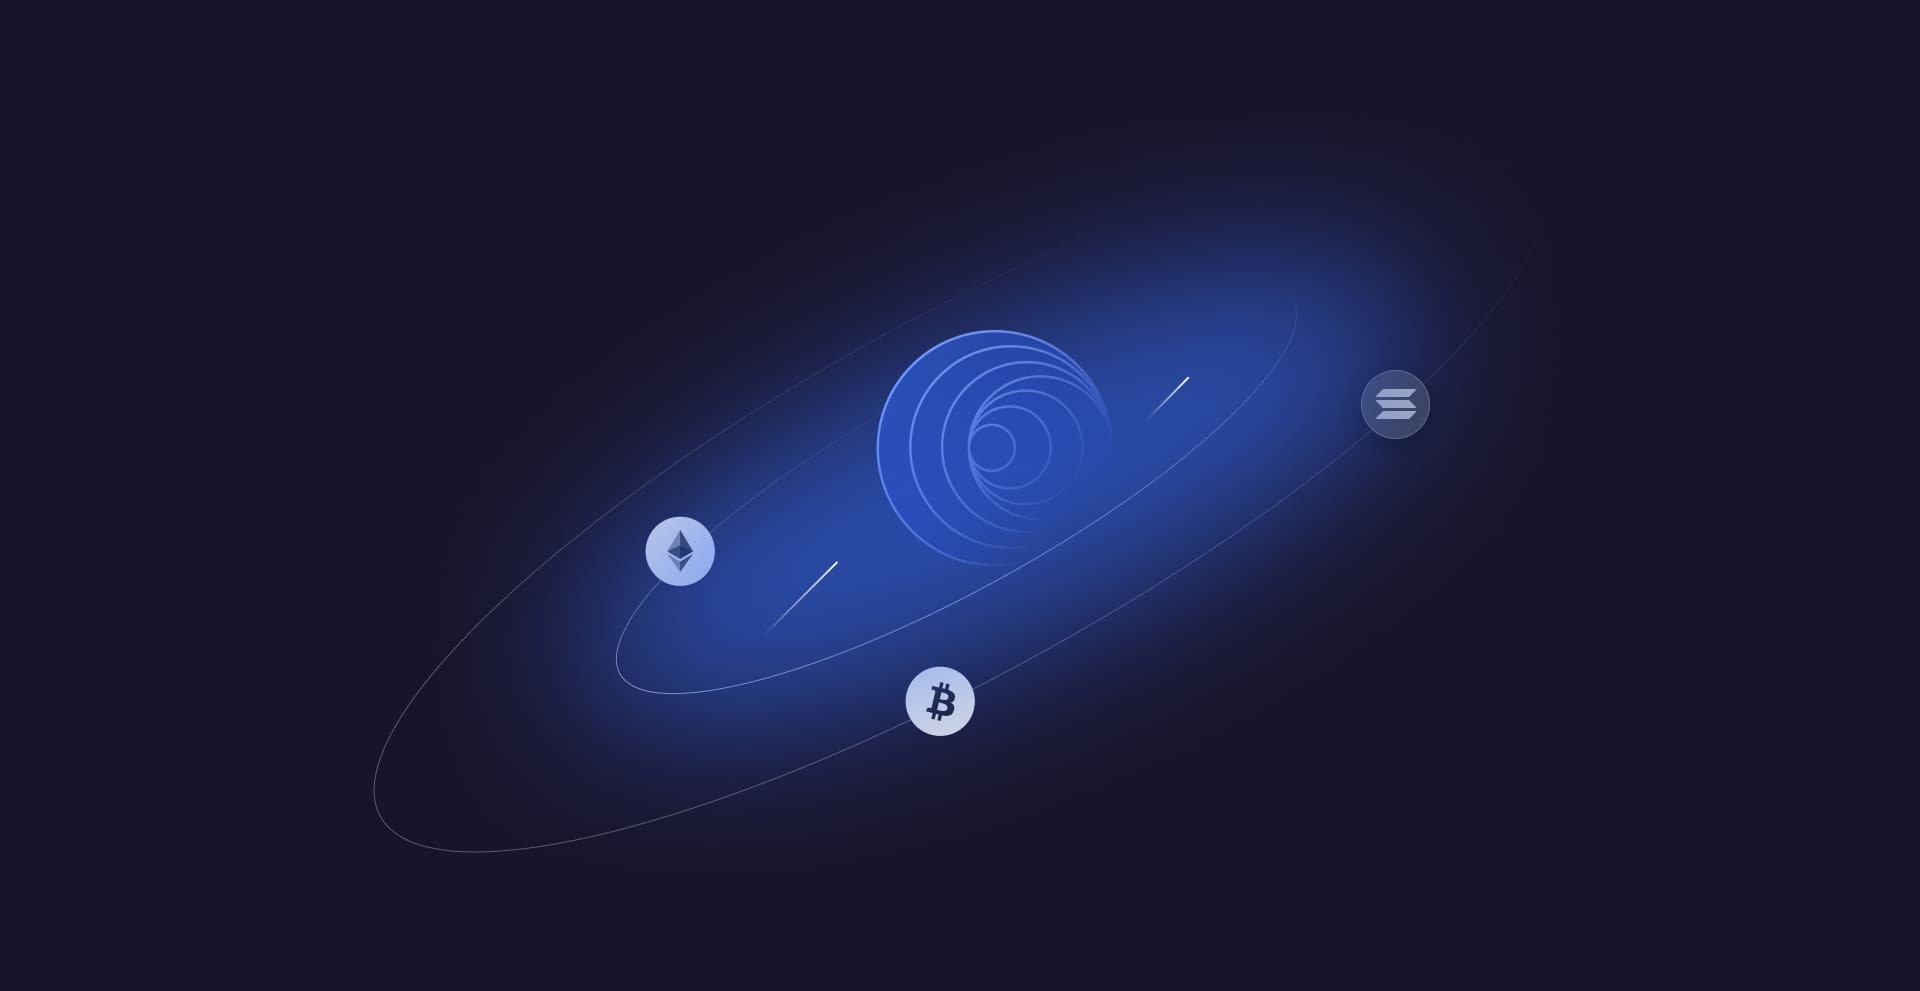 Ethereum, Bitcoin, and Solana logos in space in their orbits move around Echo logo